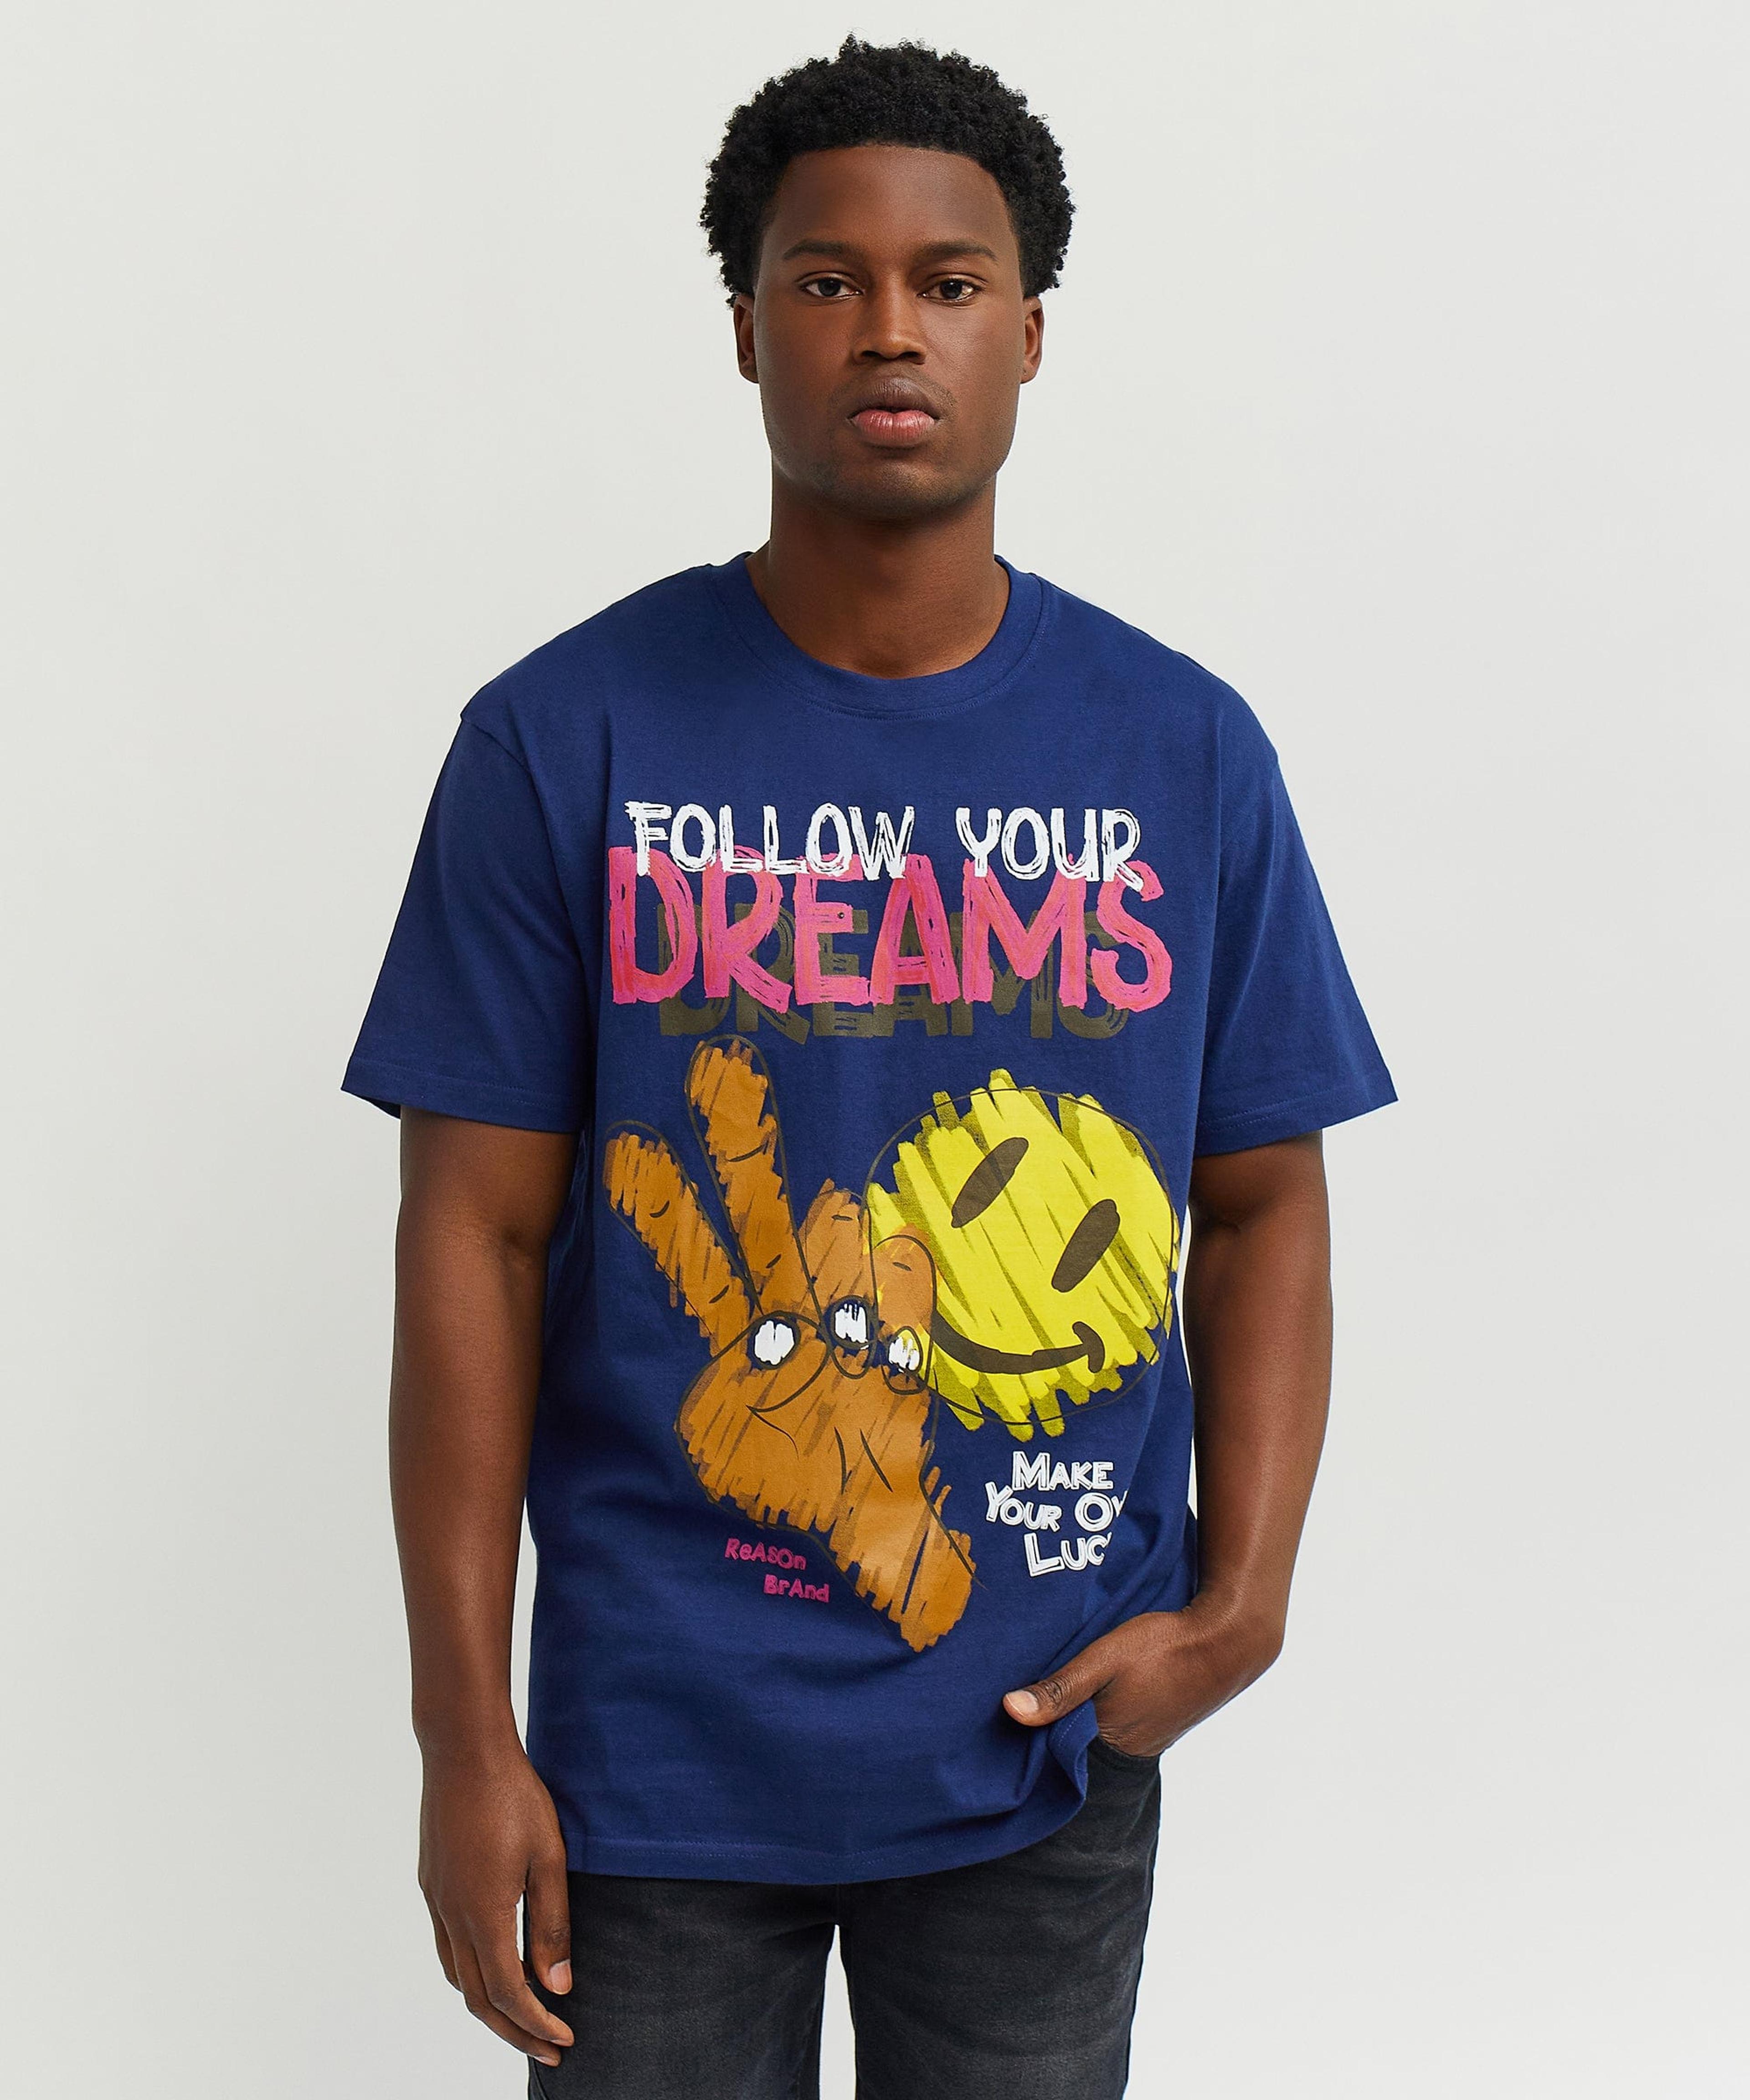 Alternate View 1 of Follow Your Dreams Short Sleeve Tee - Navy